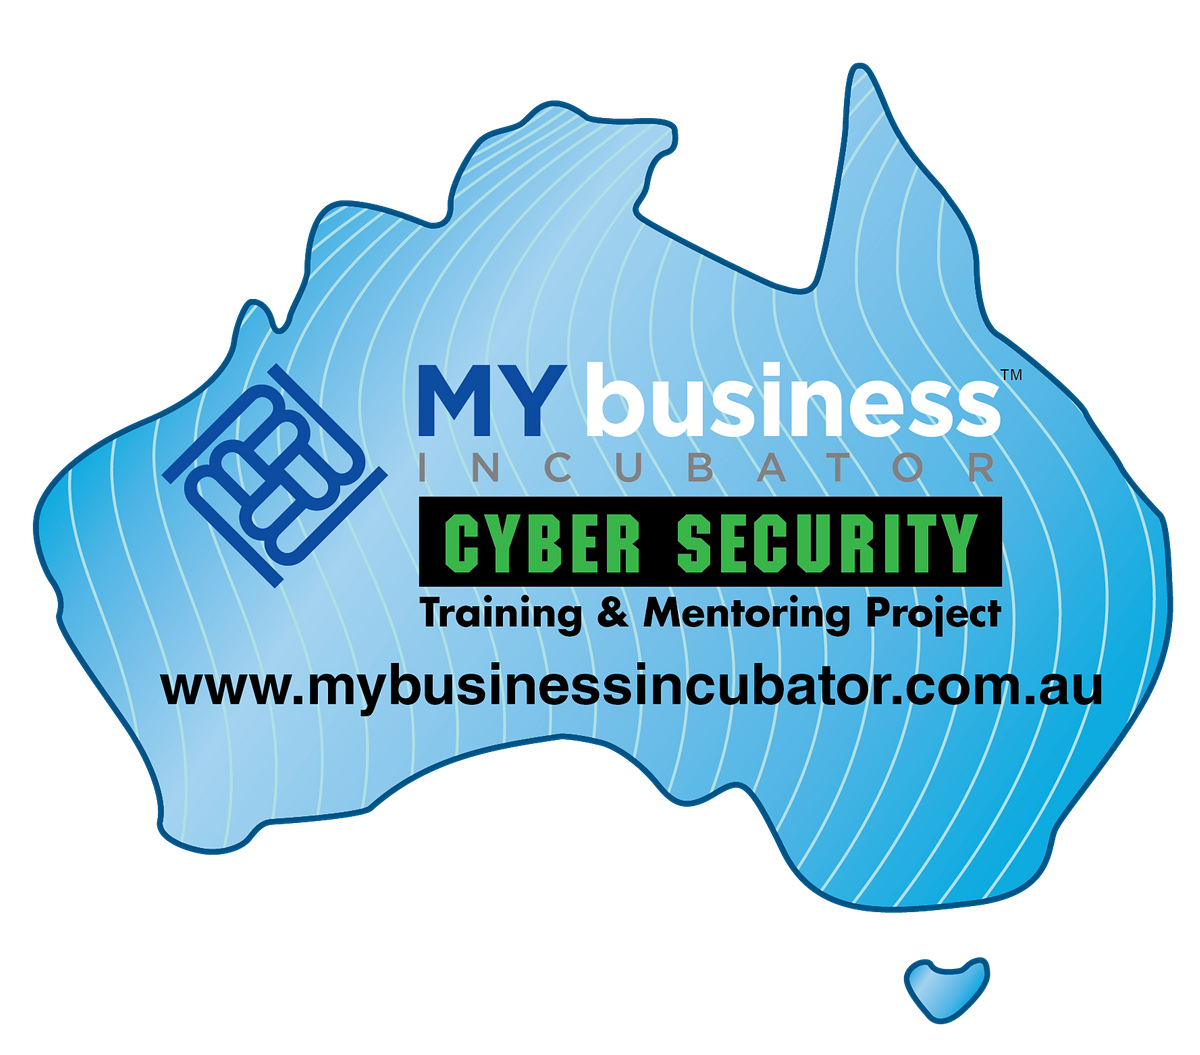 FREE Cyber Security WORKSHOP, 2nd February 2022, 5.30pm -7.30pm, Adelaide